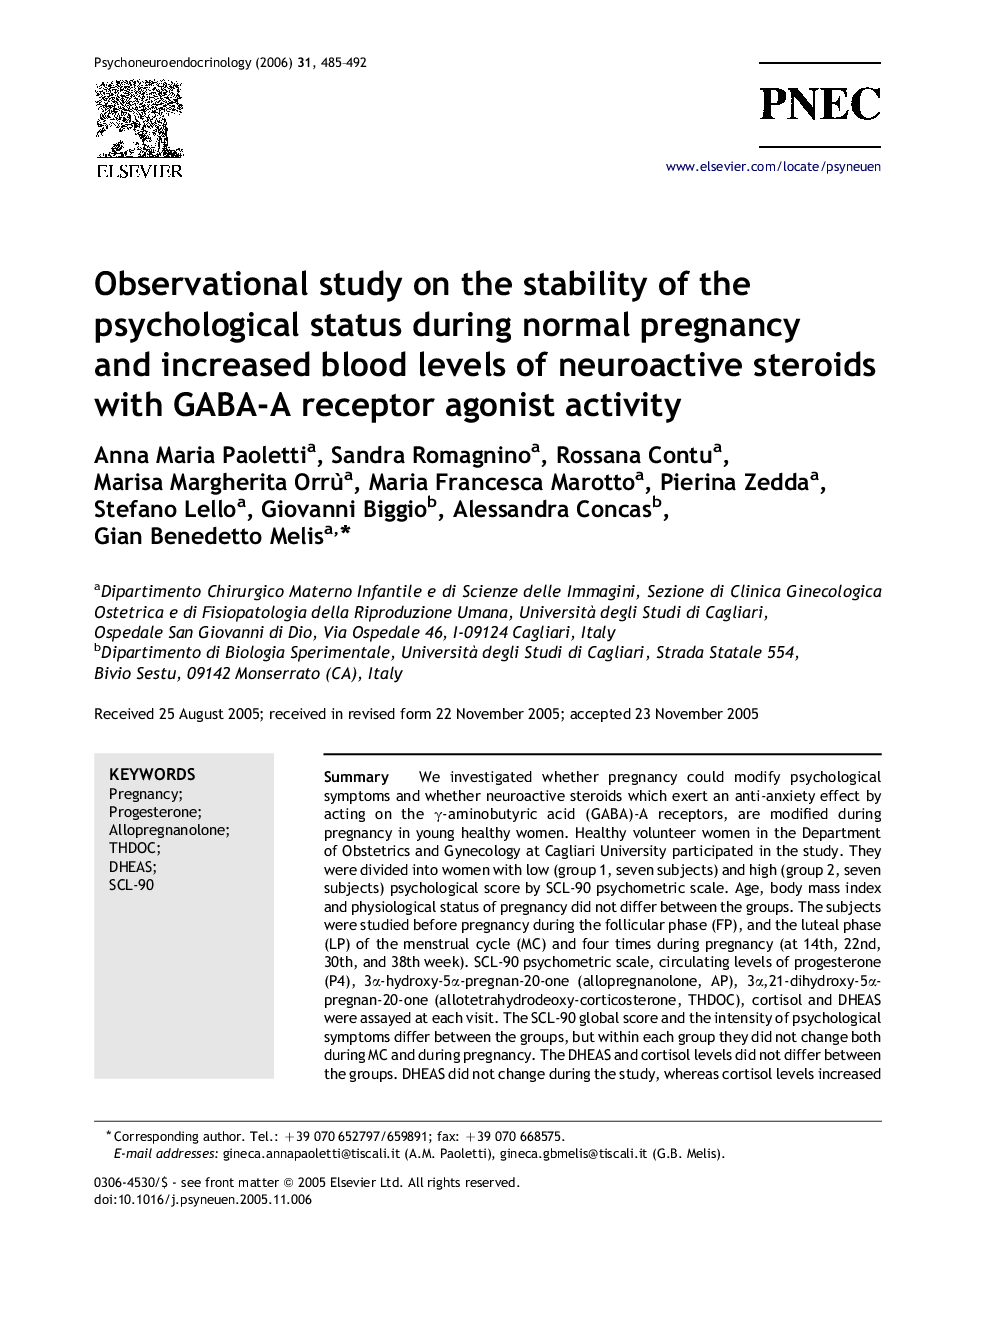 Observational study on the stability of the psychological status during normal pregnancy and increased blood levels of neuroactive steroids with GABA-A receptor agonist activity